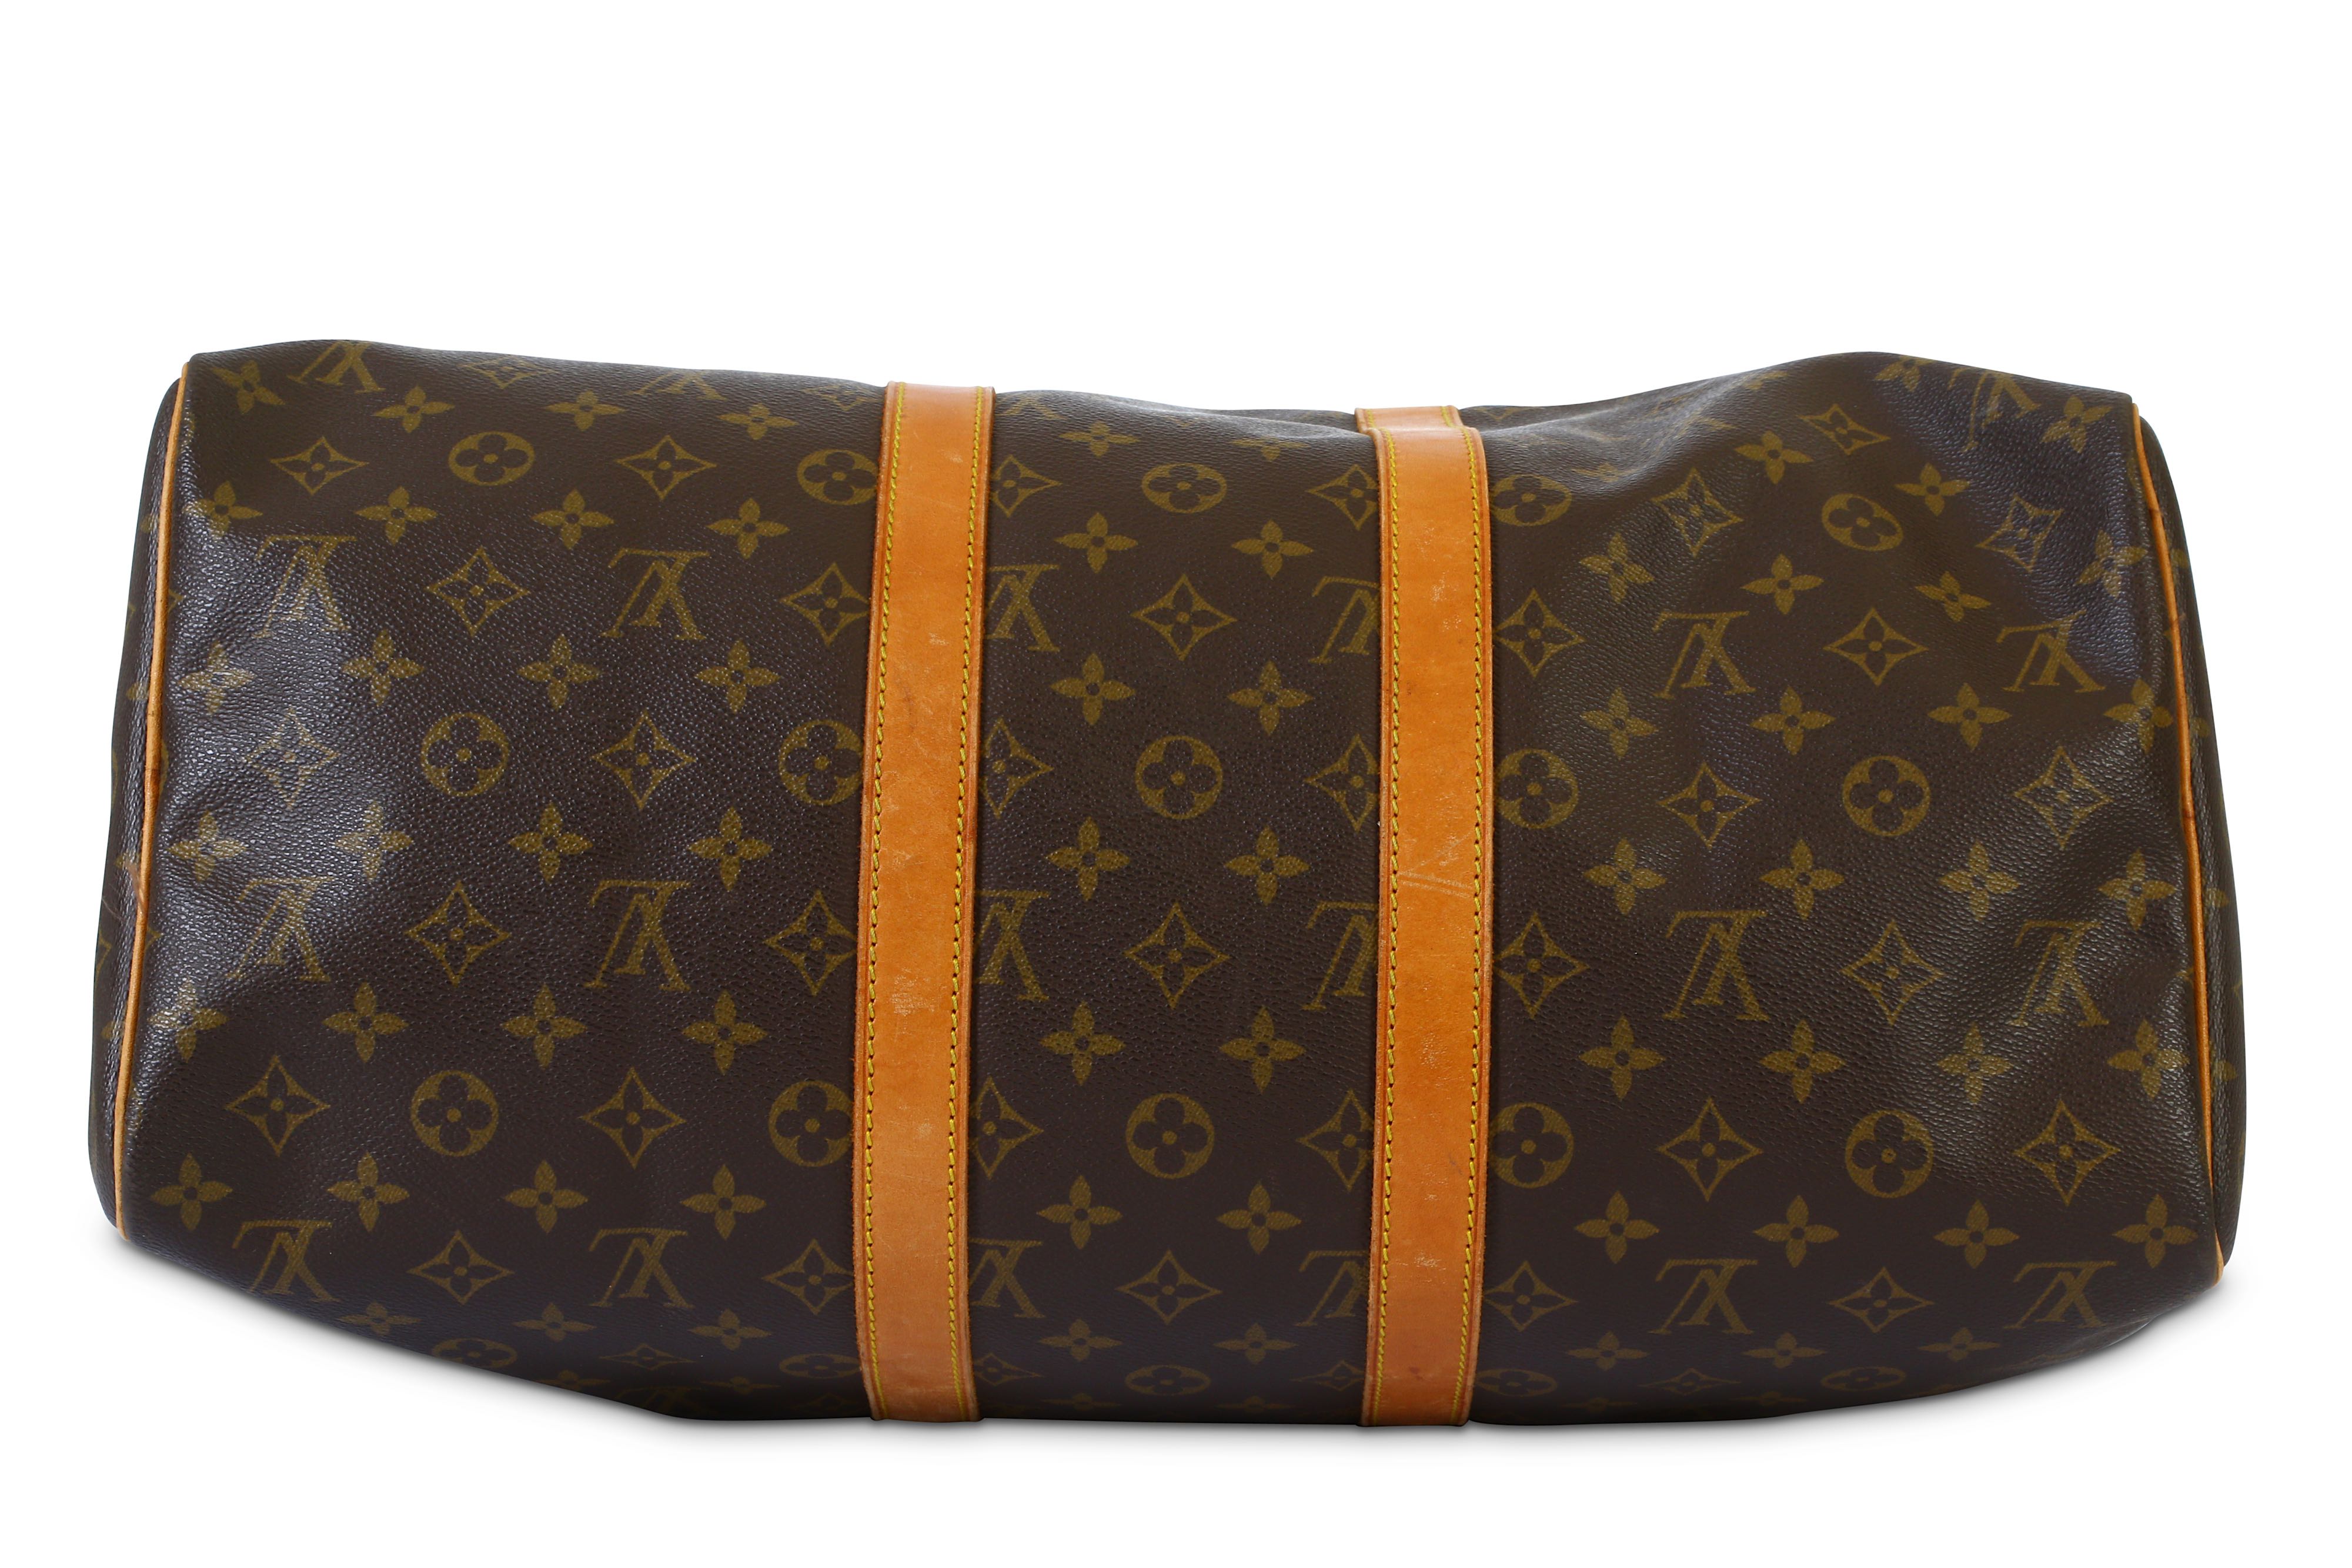 Sold at Auction: Louis Vuitton Monogram Keepall 45 Duffle 1984